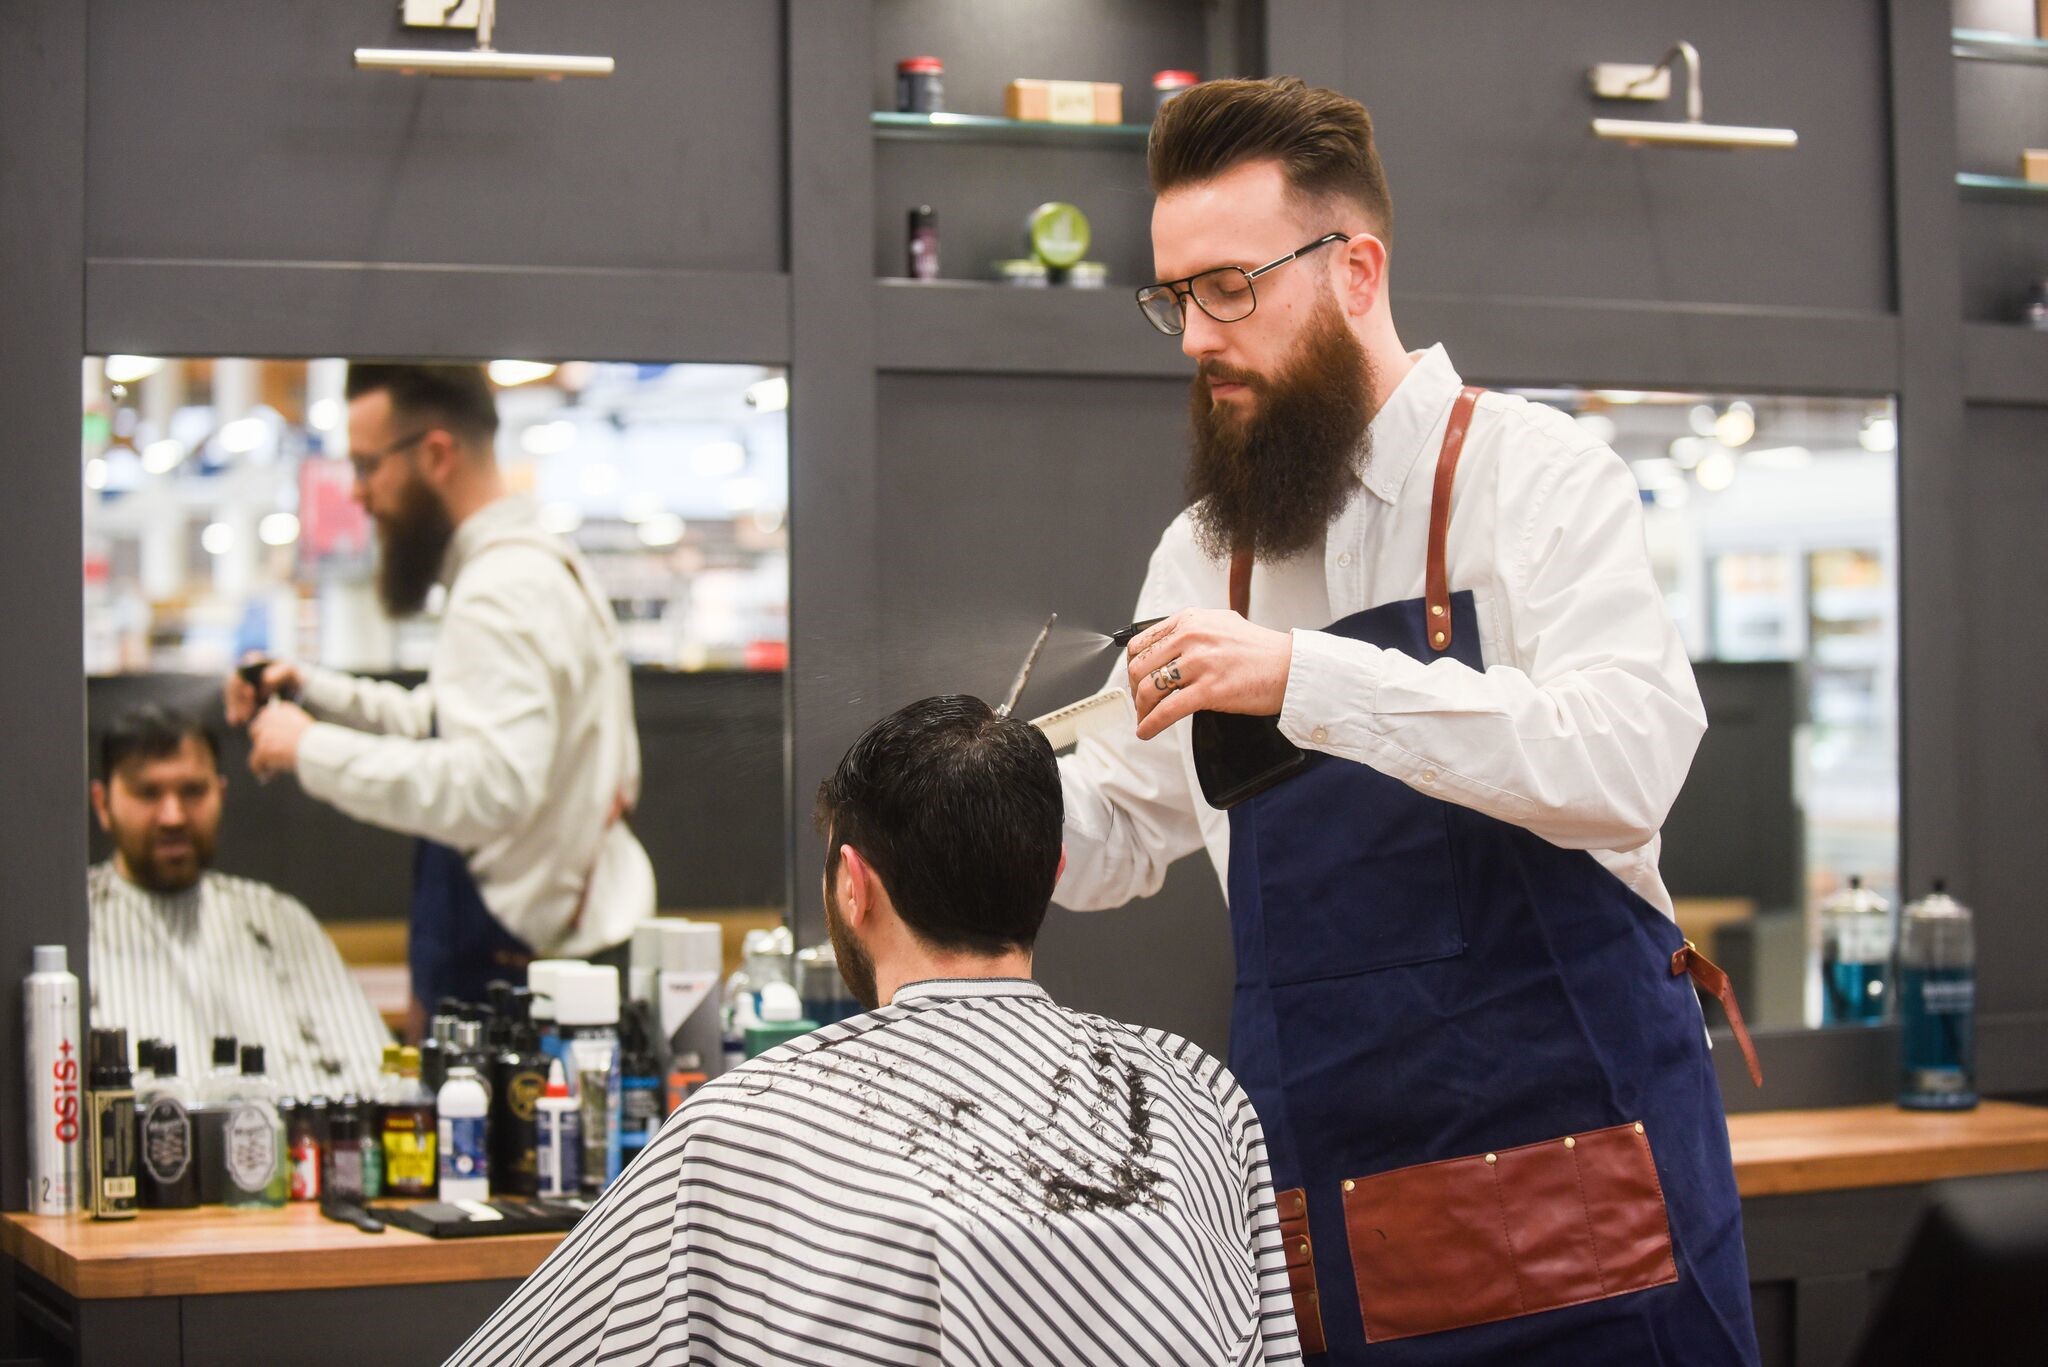 Barber Ken Hermes has become an Ambassador for the charity